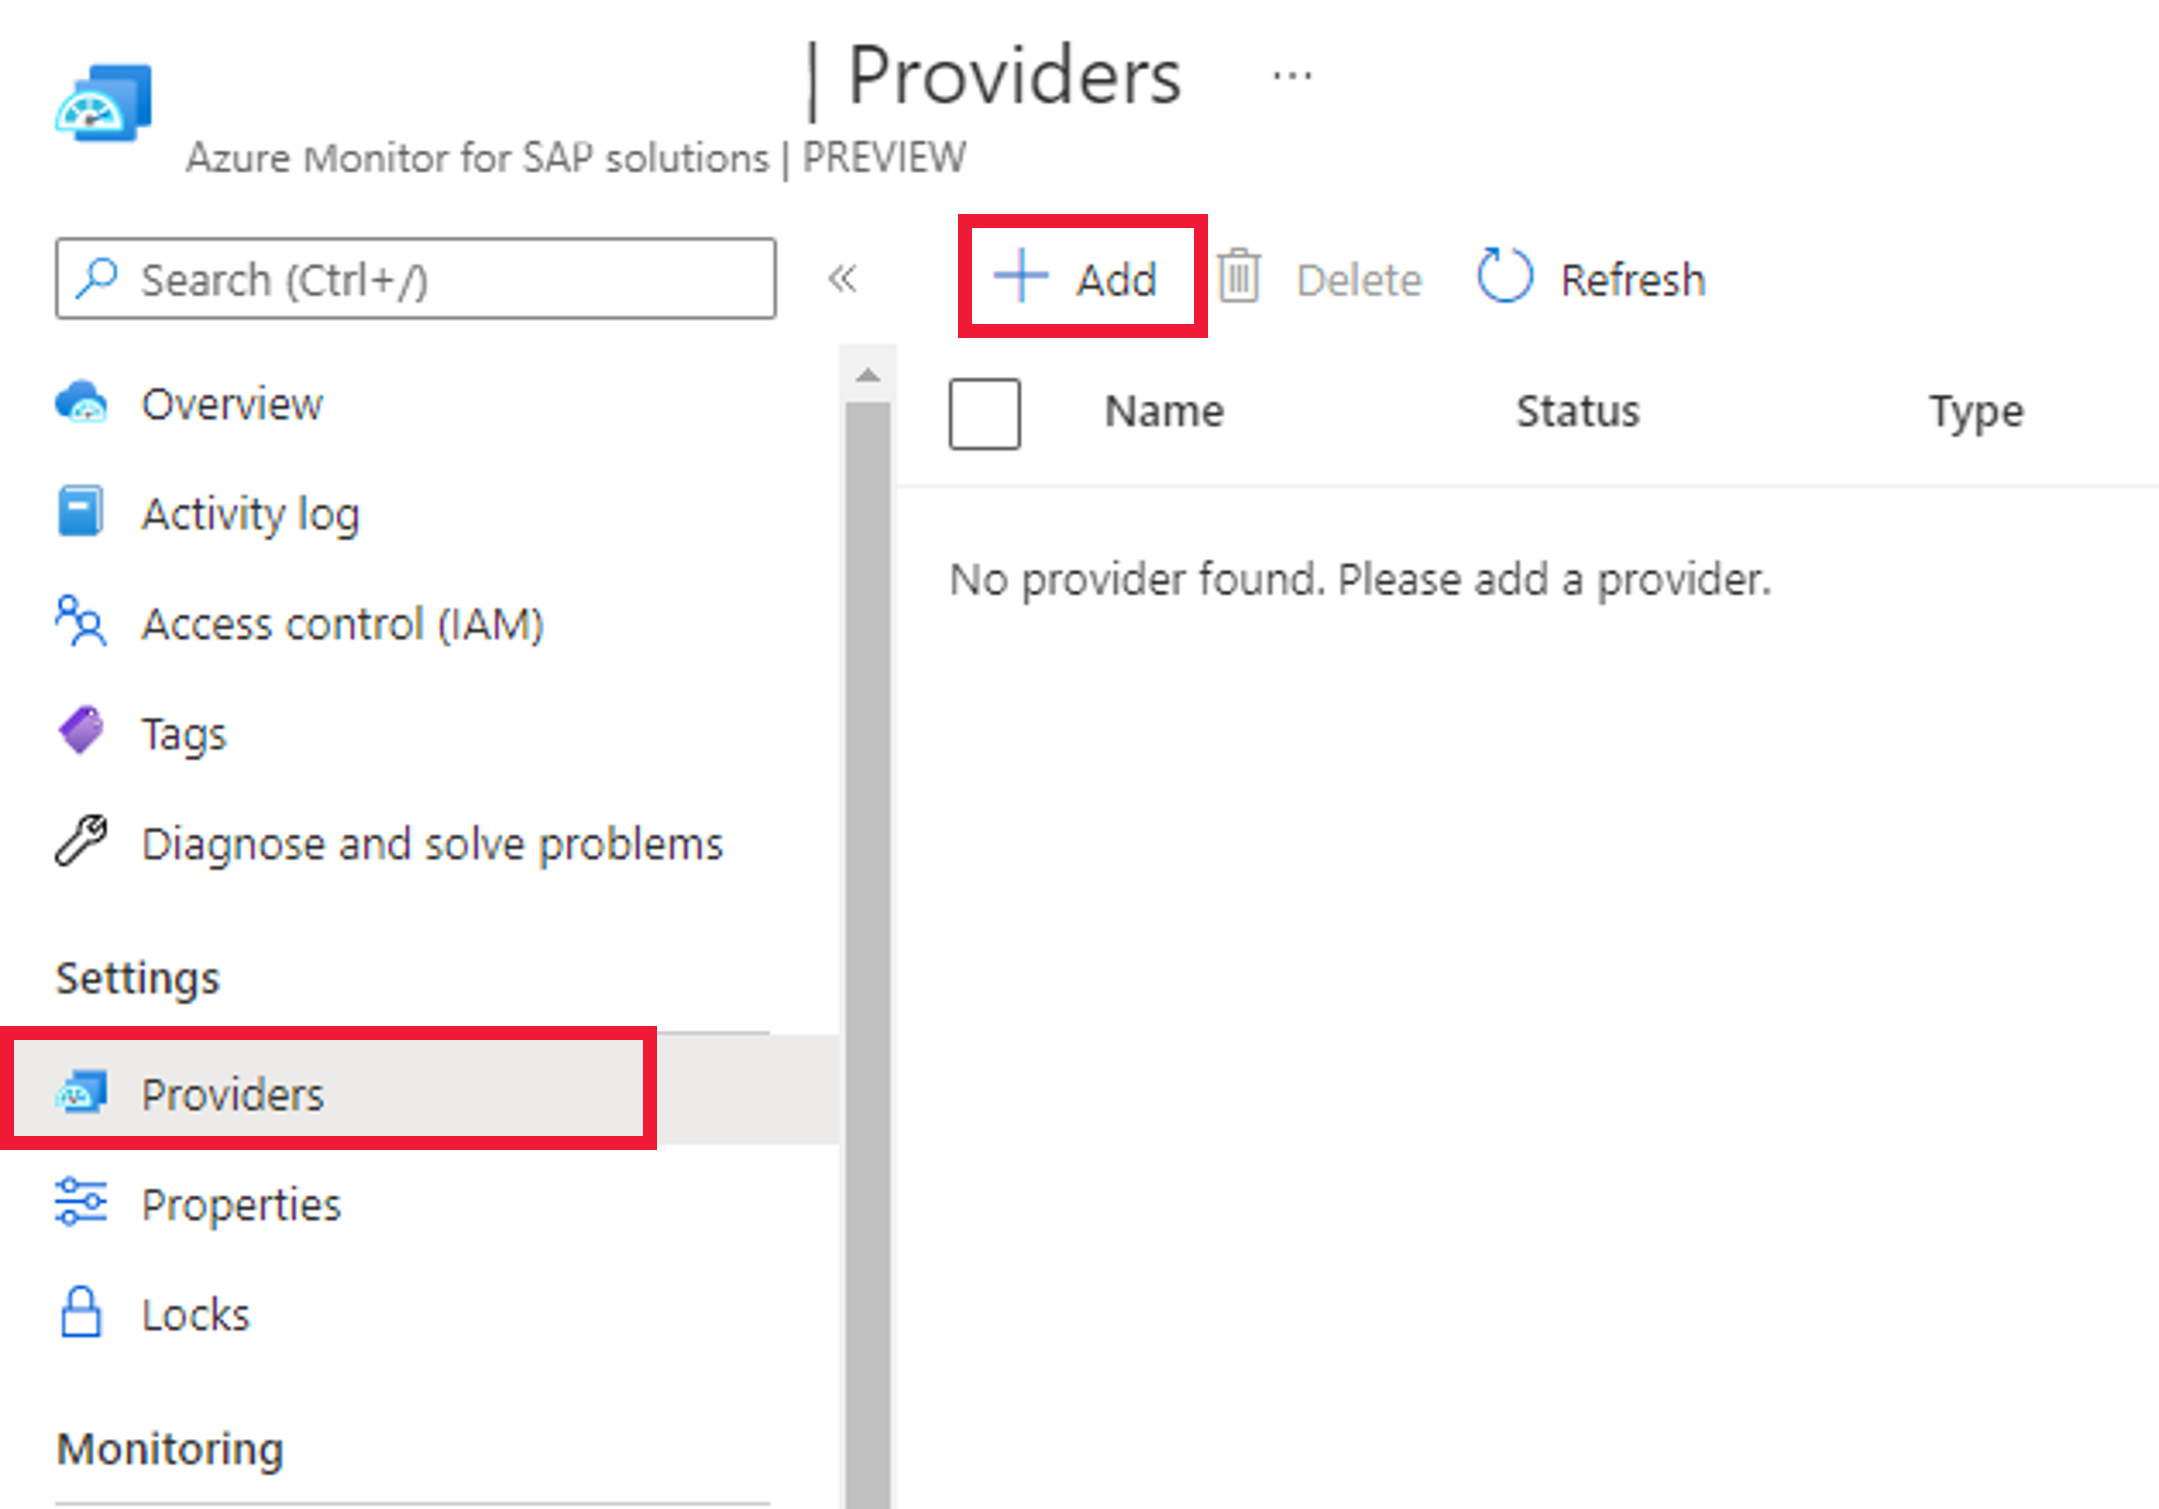 Diagram of Azure Monitor for SAP solutions resource in the Azure portal, showing button to add a new provider.